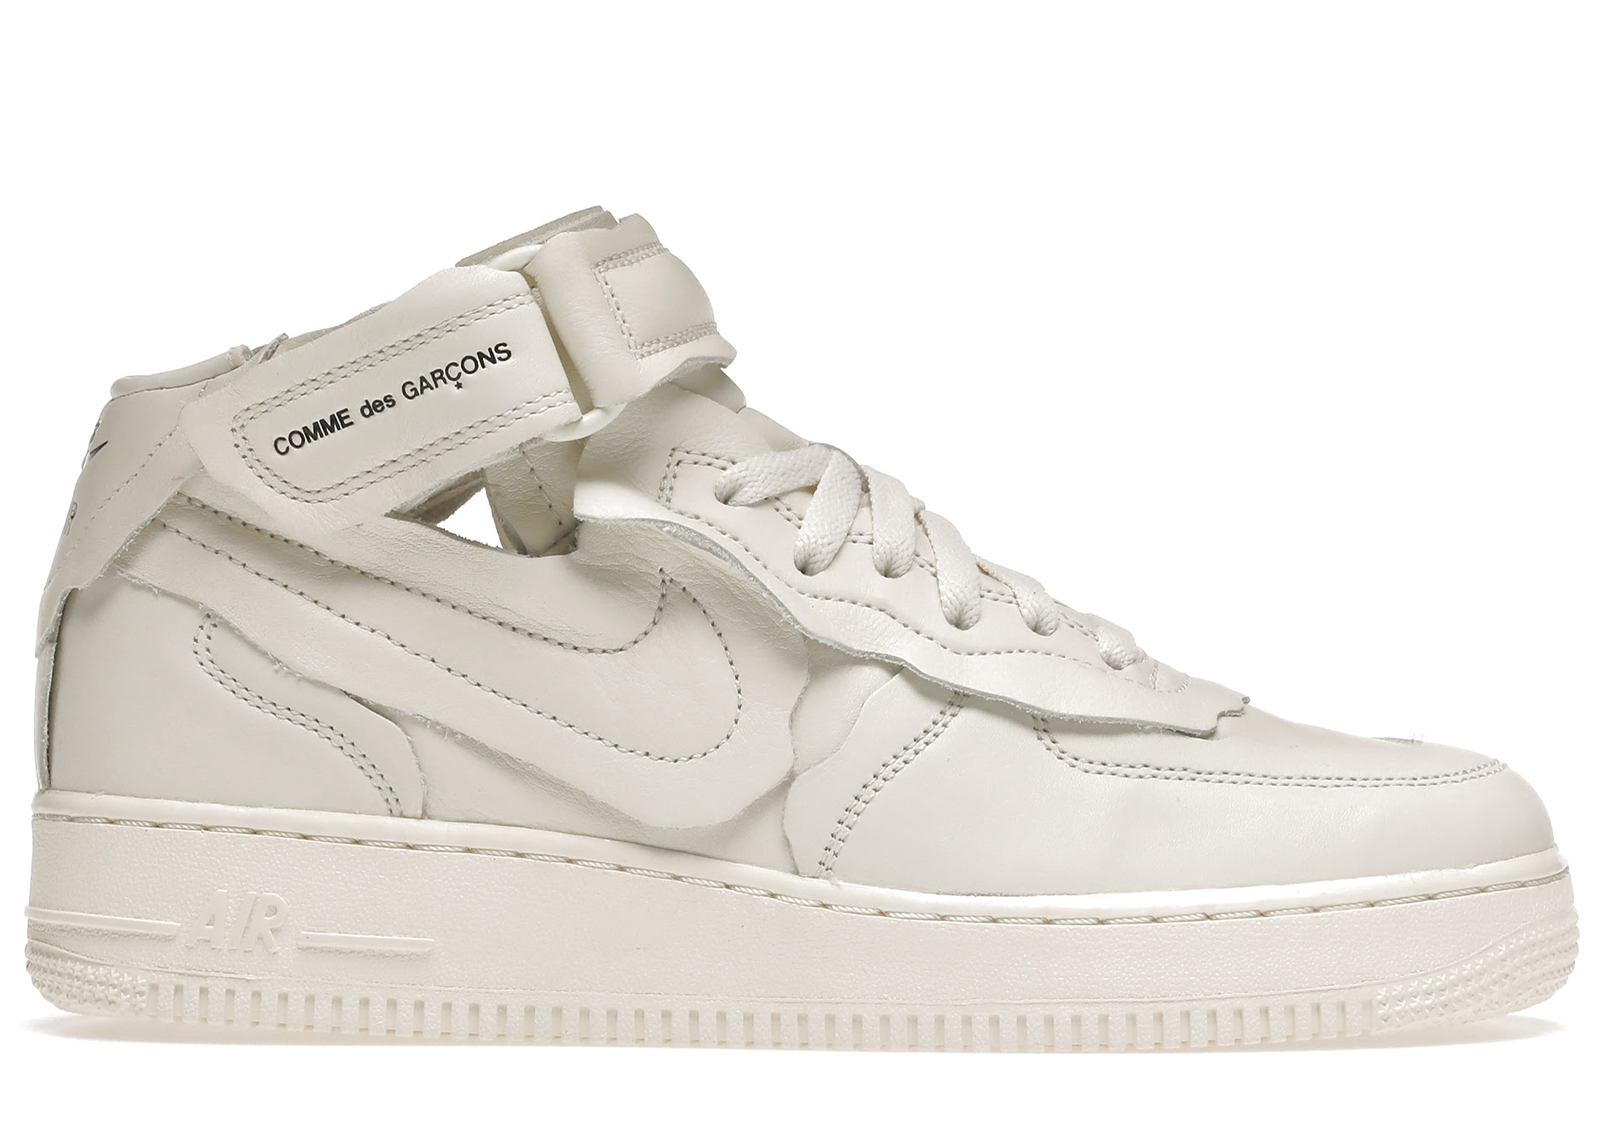 Nike Air Force 1 Mid Comme des Garcons White メンズ - DC3601-100 - JP